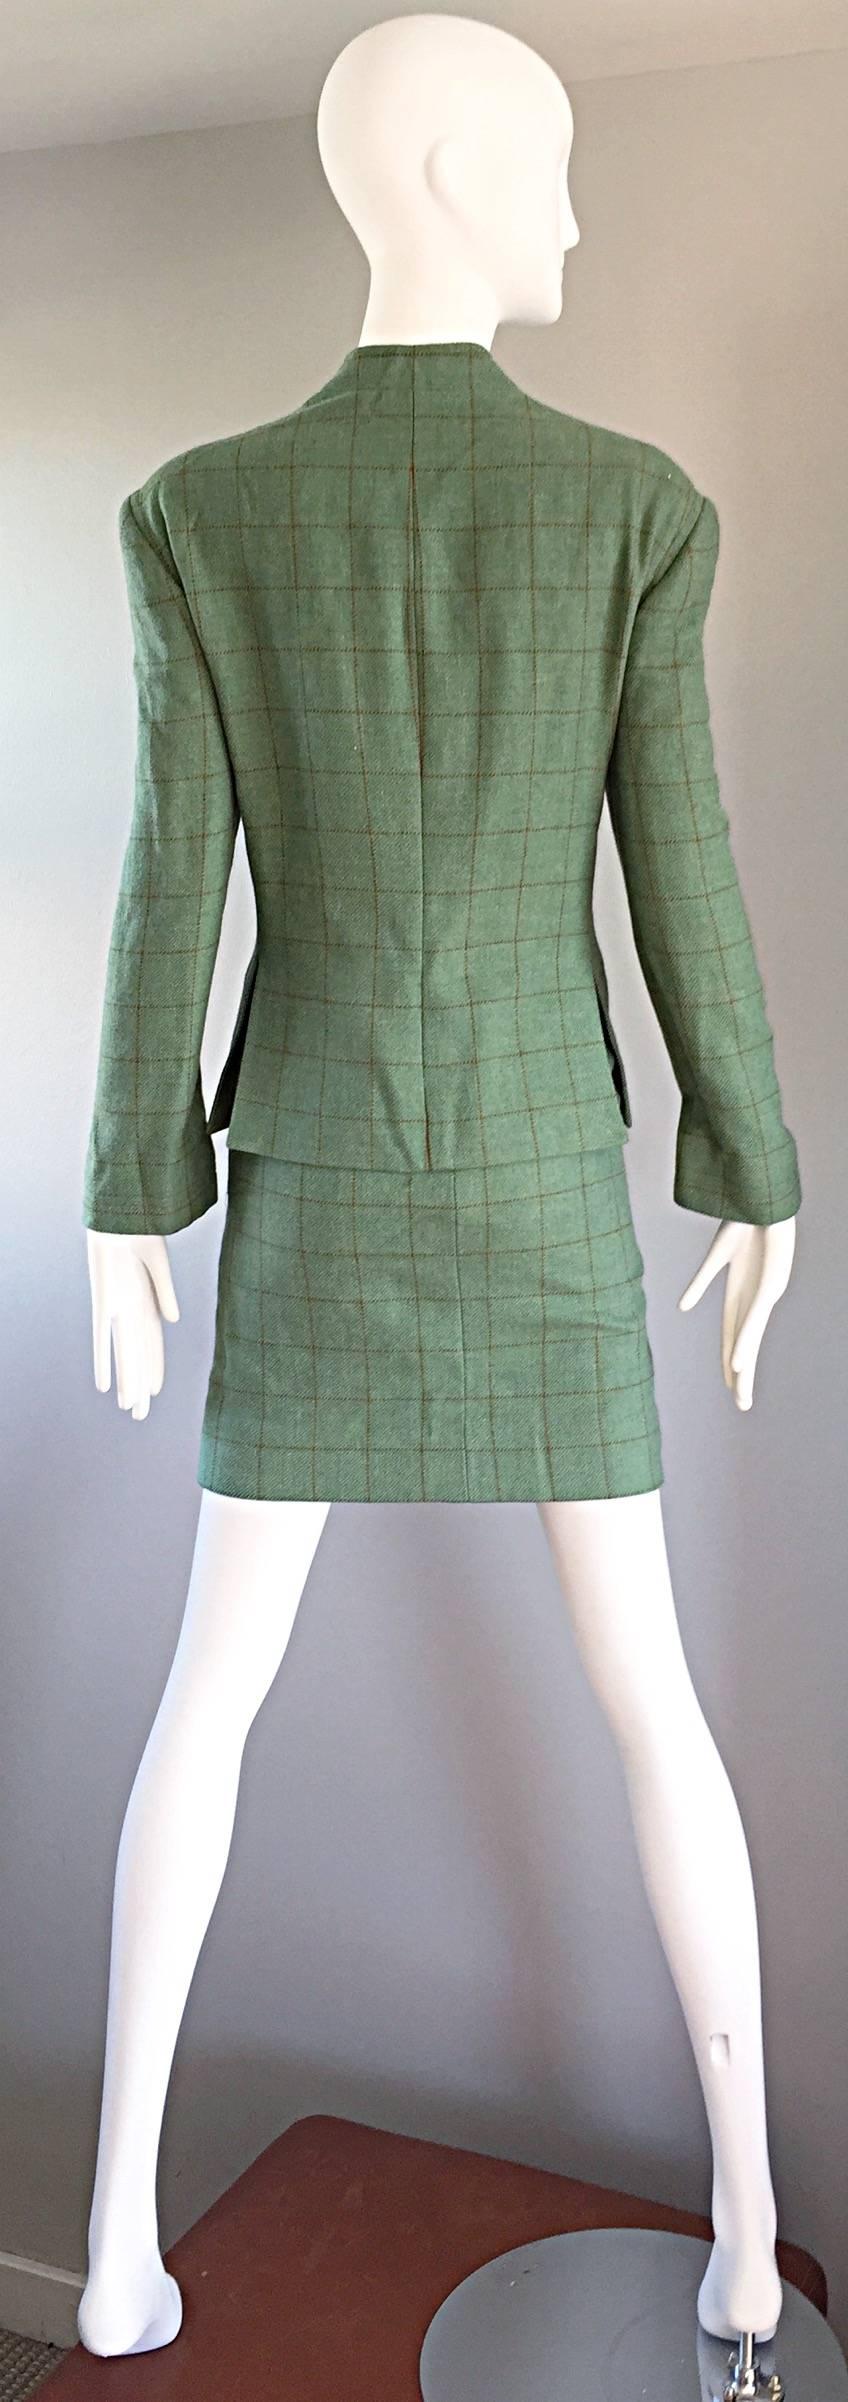 Gray Vintage Isaac Mizrahi Green and Brown Wool + Leather Asian Inspired Skirt Suit